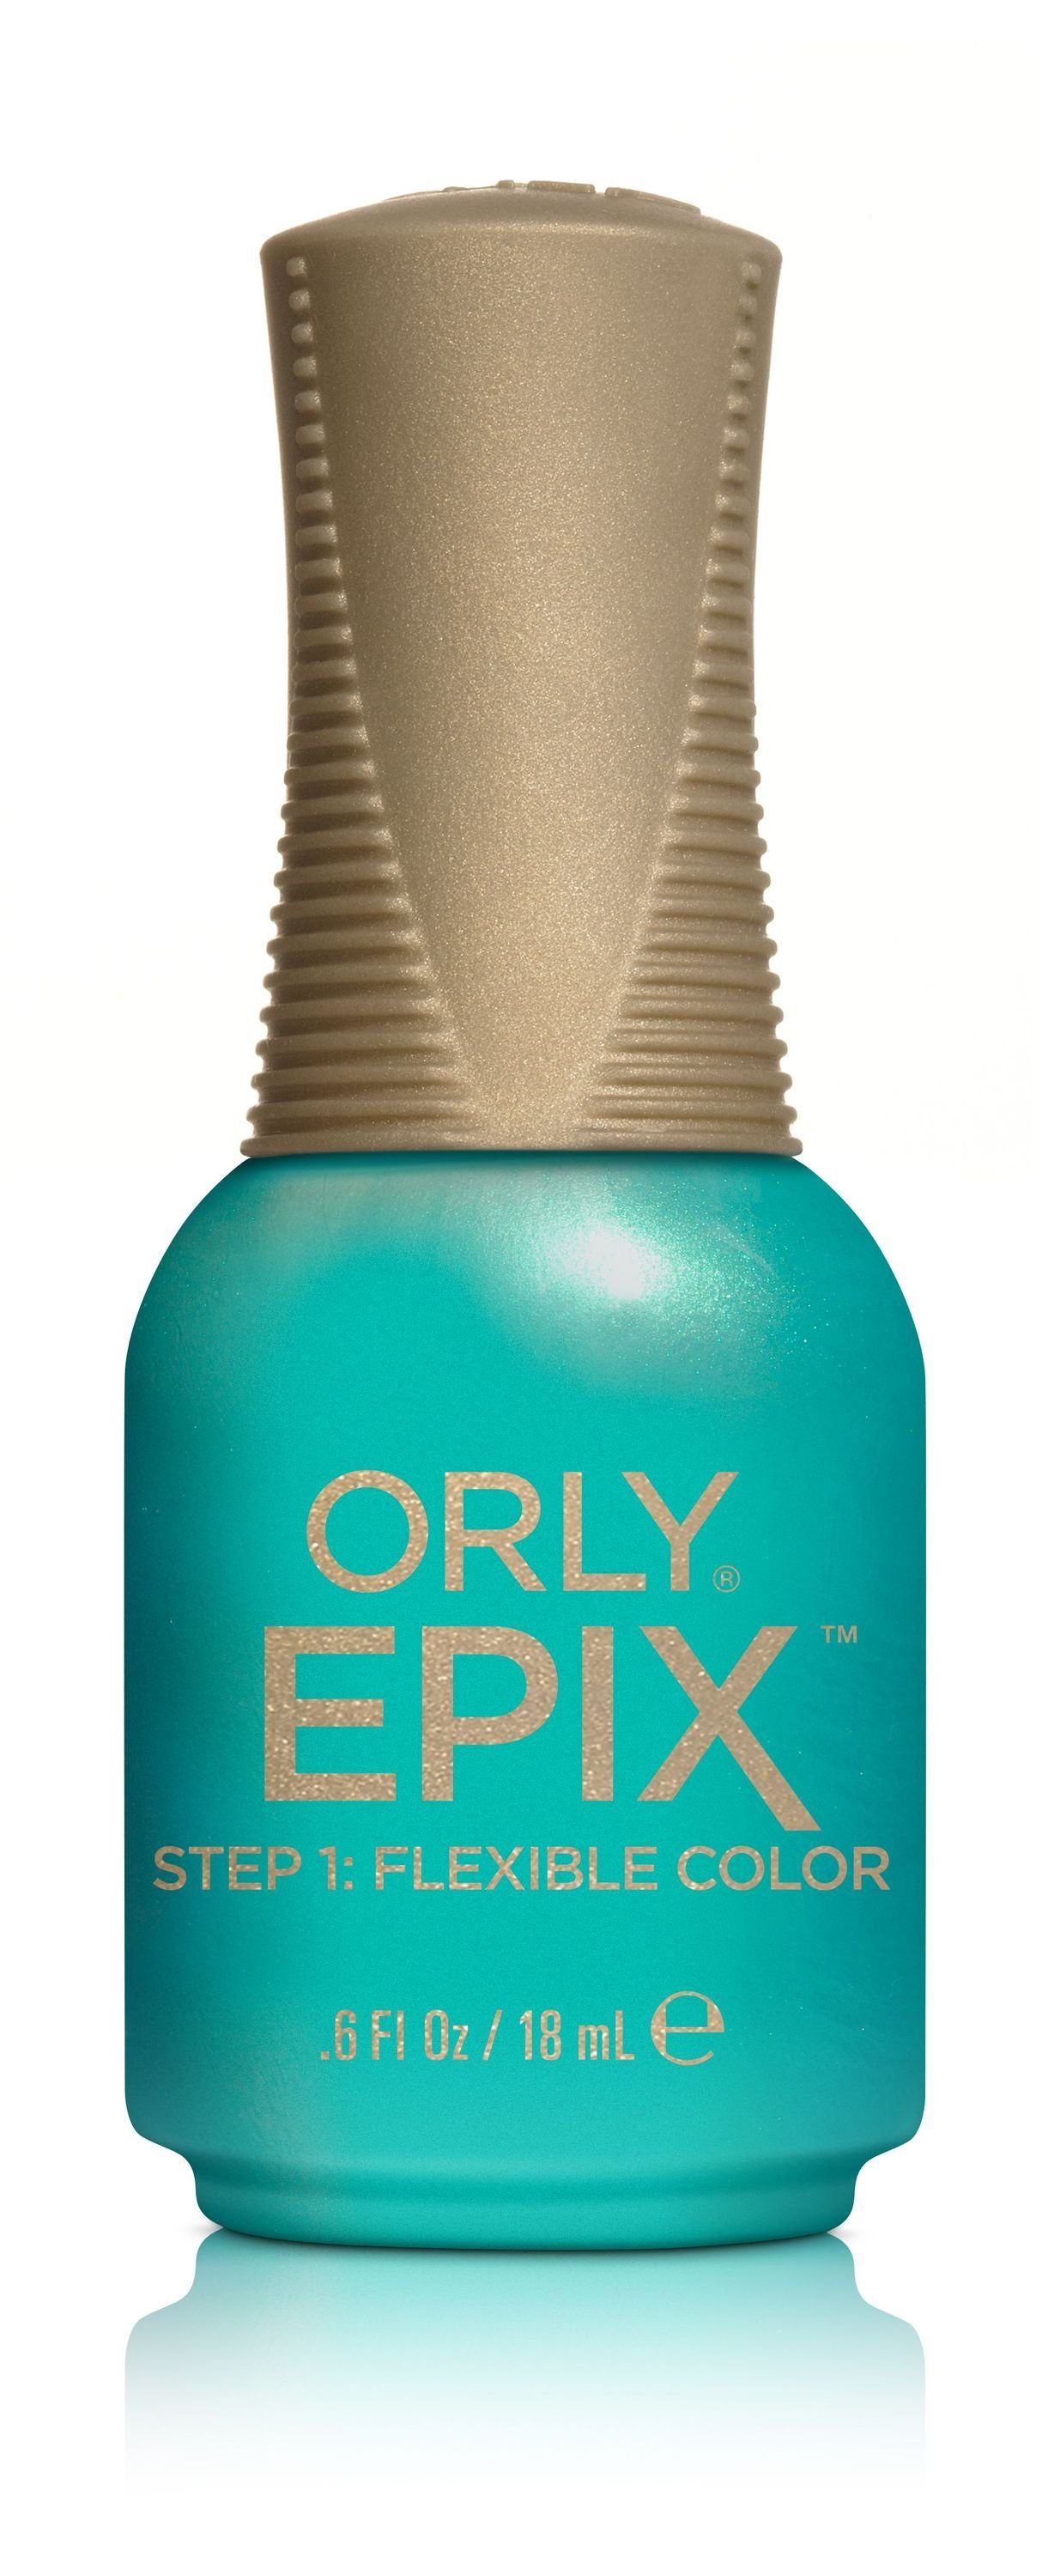 ORLY Nagellack ORLY - EPIX Flexible Color - Green Screen, 18 ML